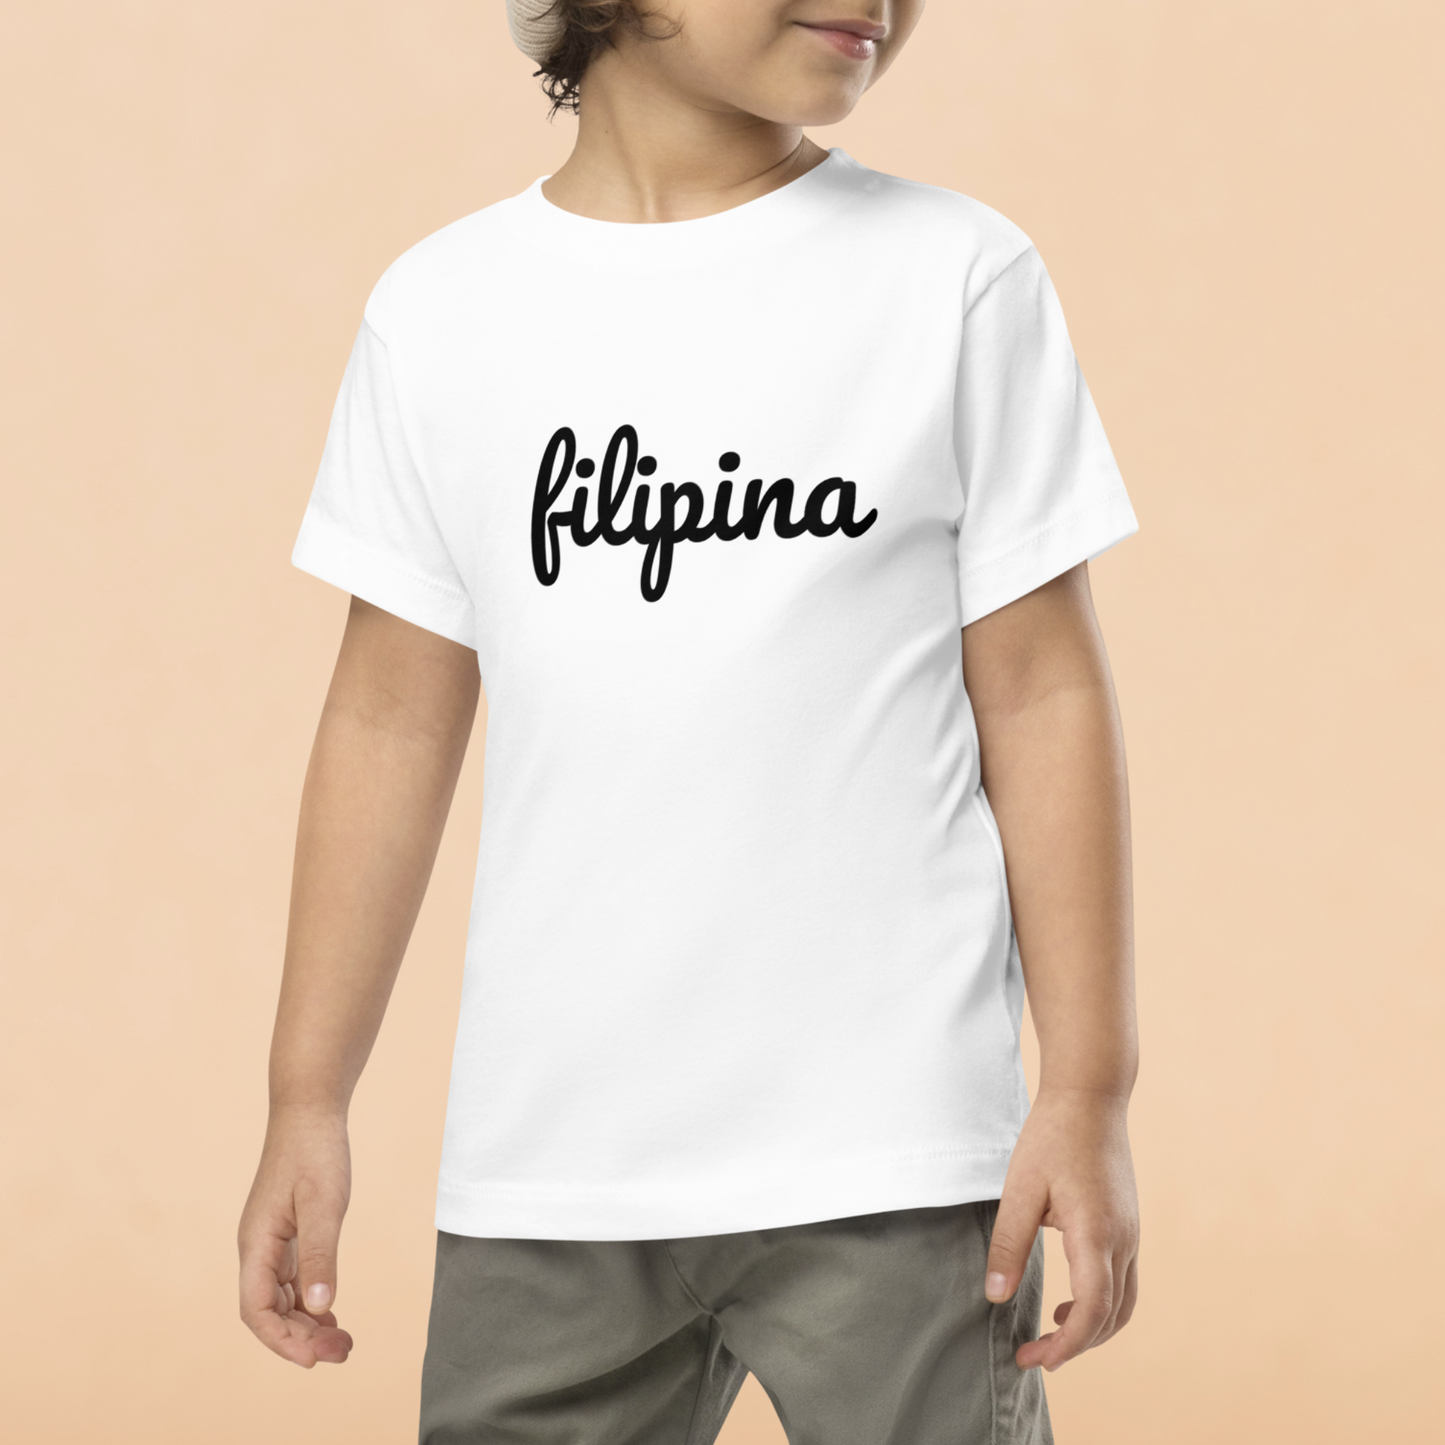 Filipina Statement Cotton T-Shirt for Toddlers